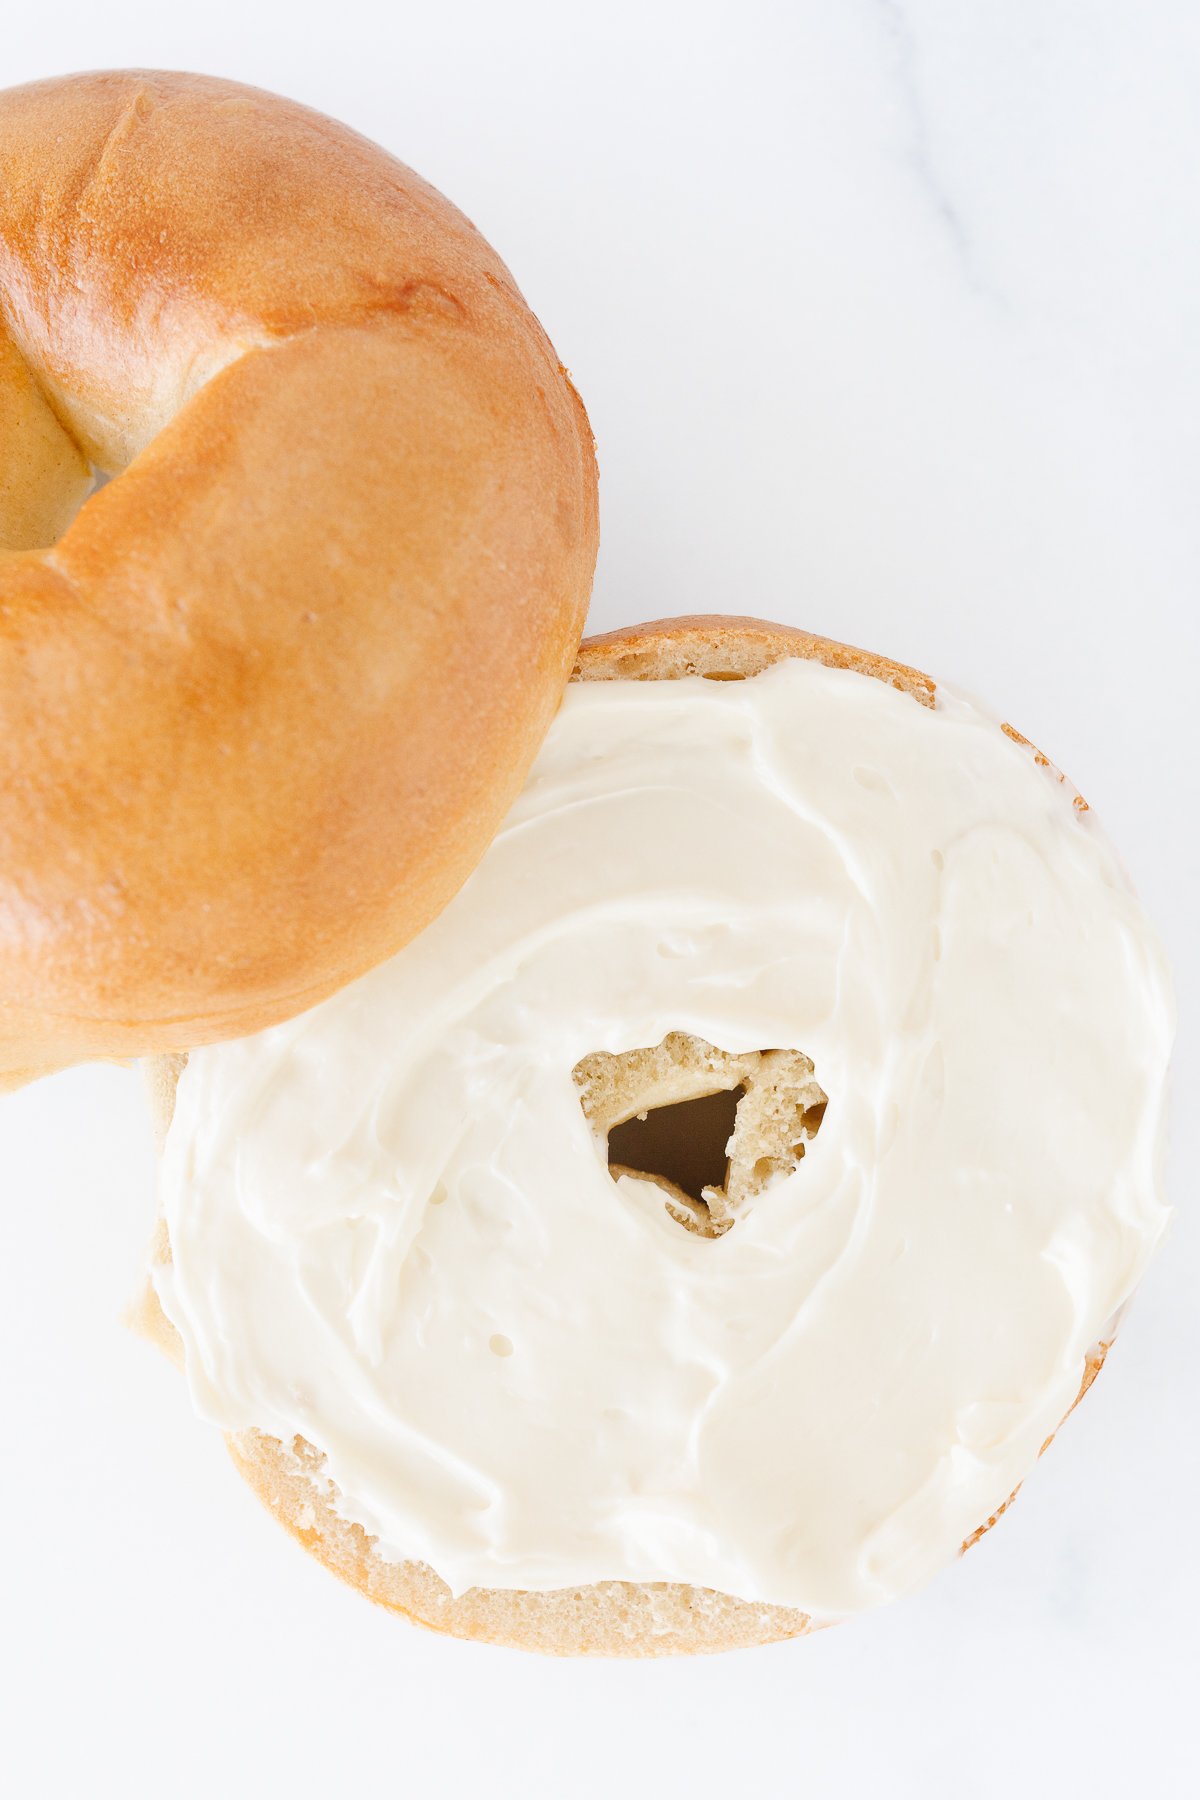 Thick bagel smothered in whipped cream cheese.